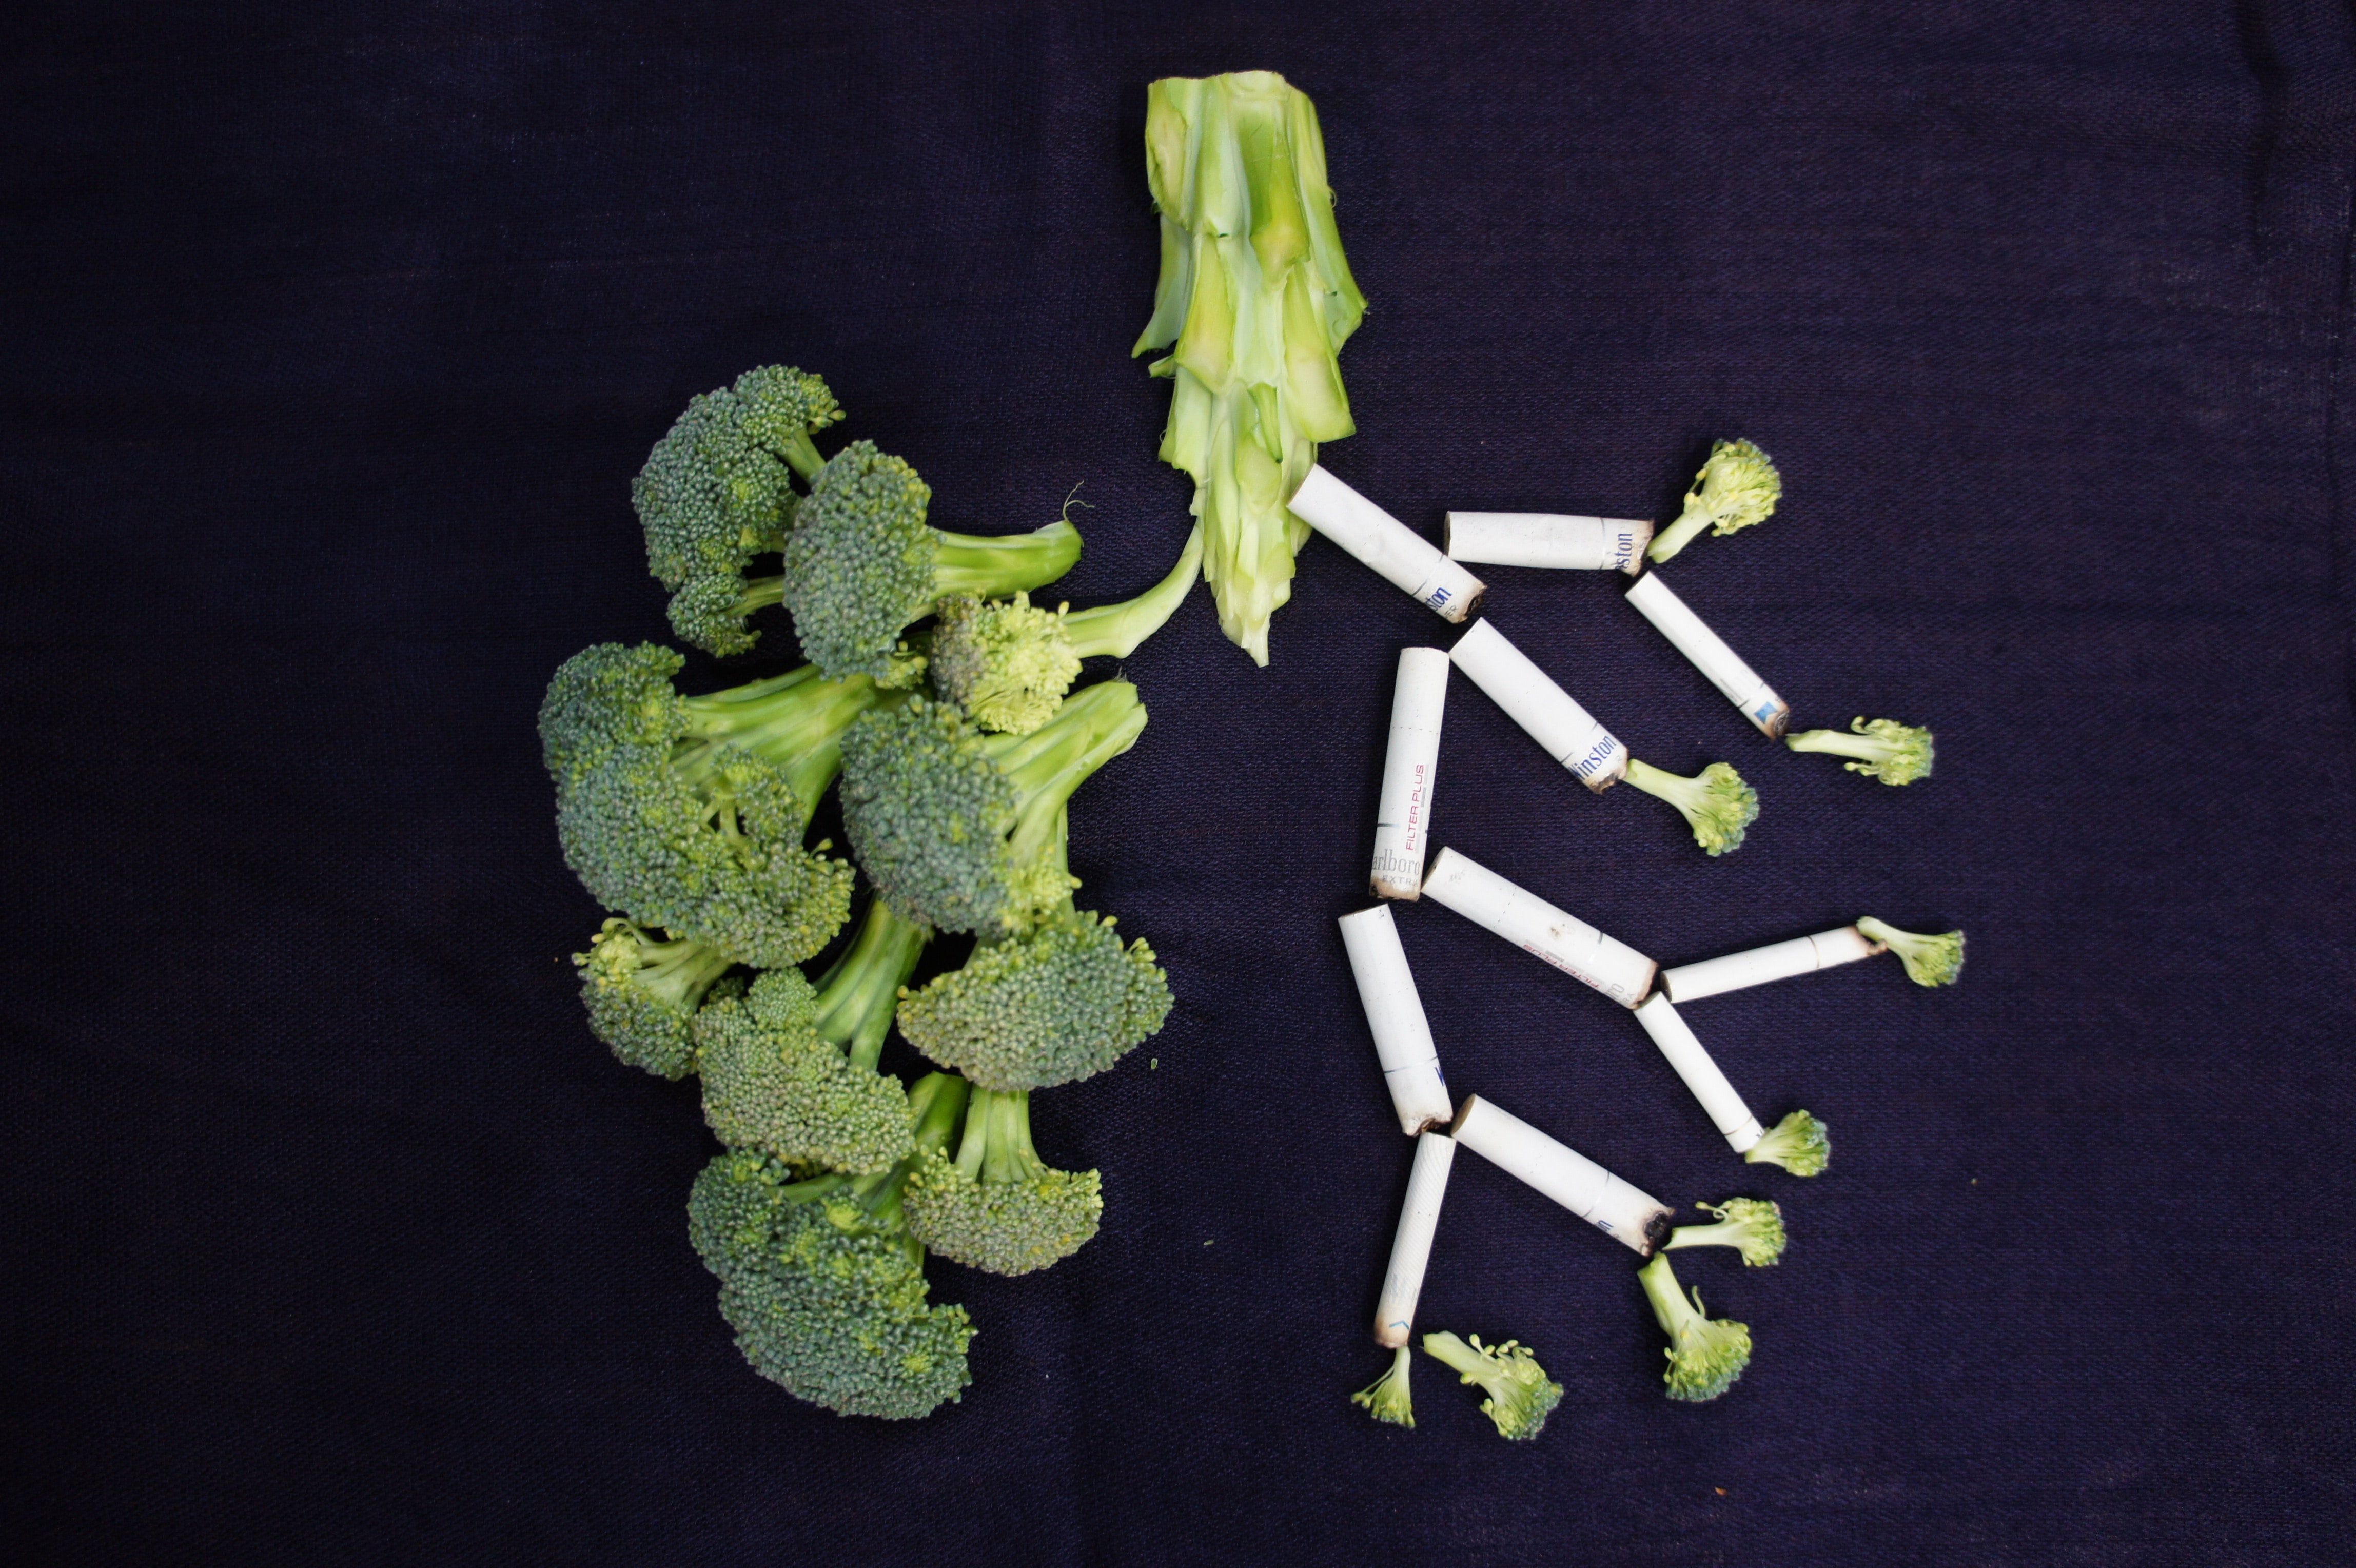 broccoli placed in the shape of a lung